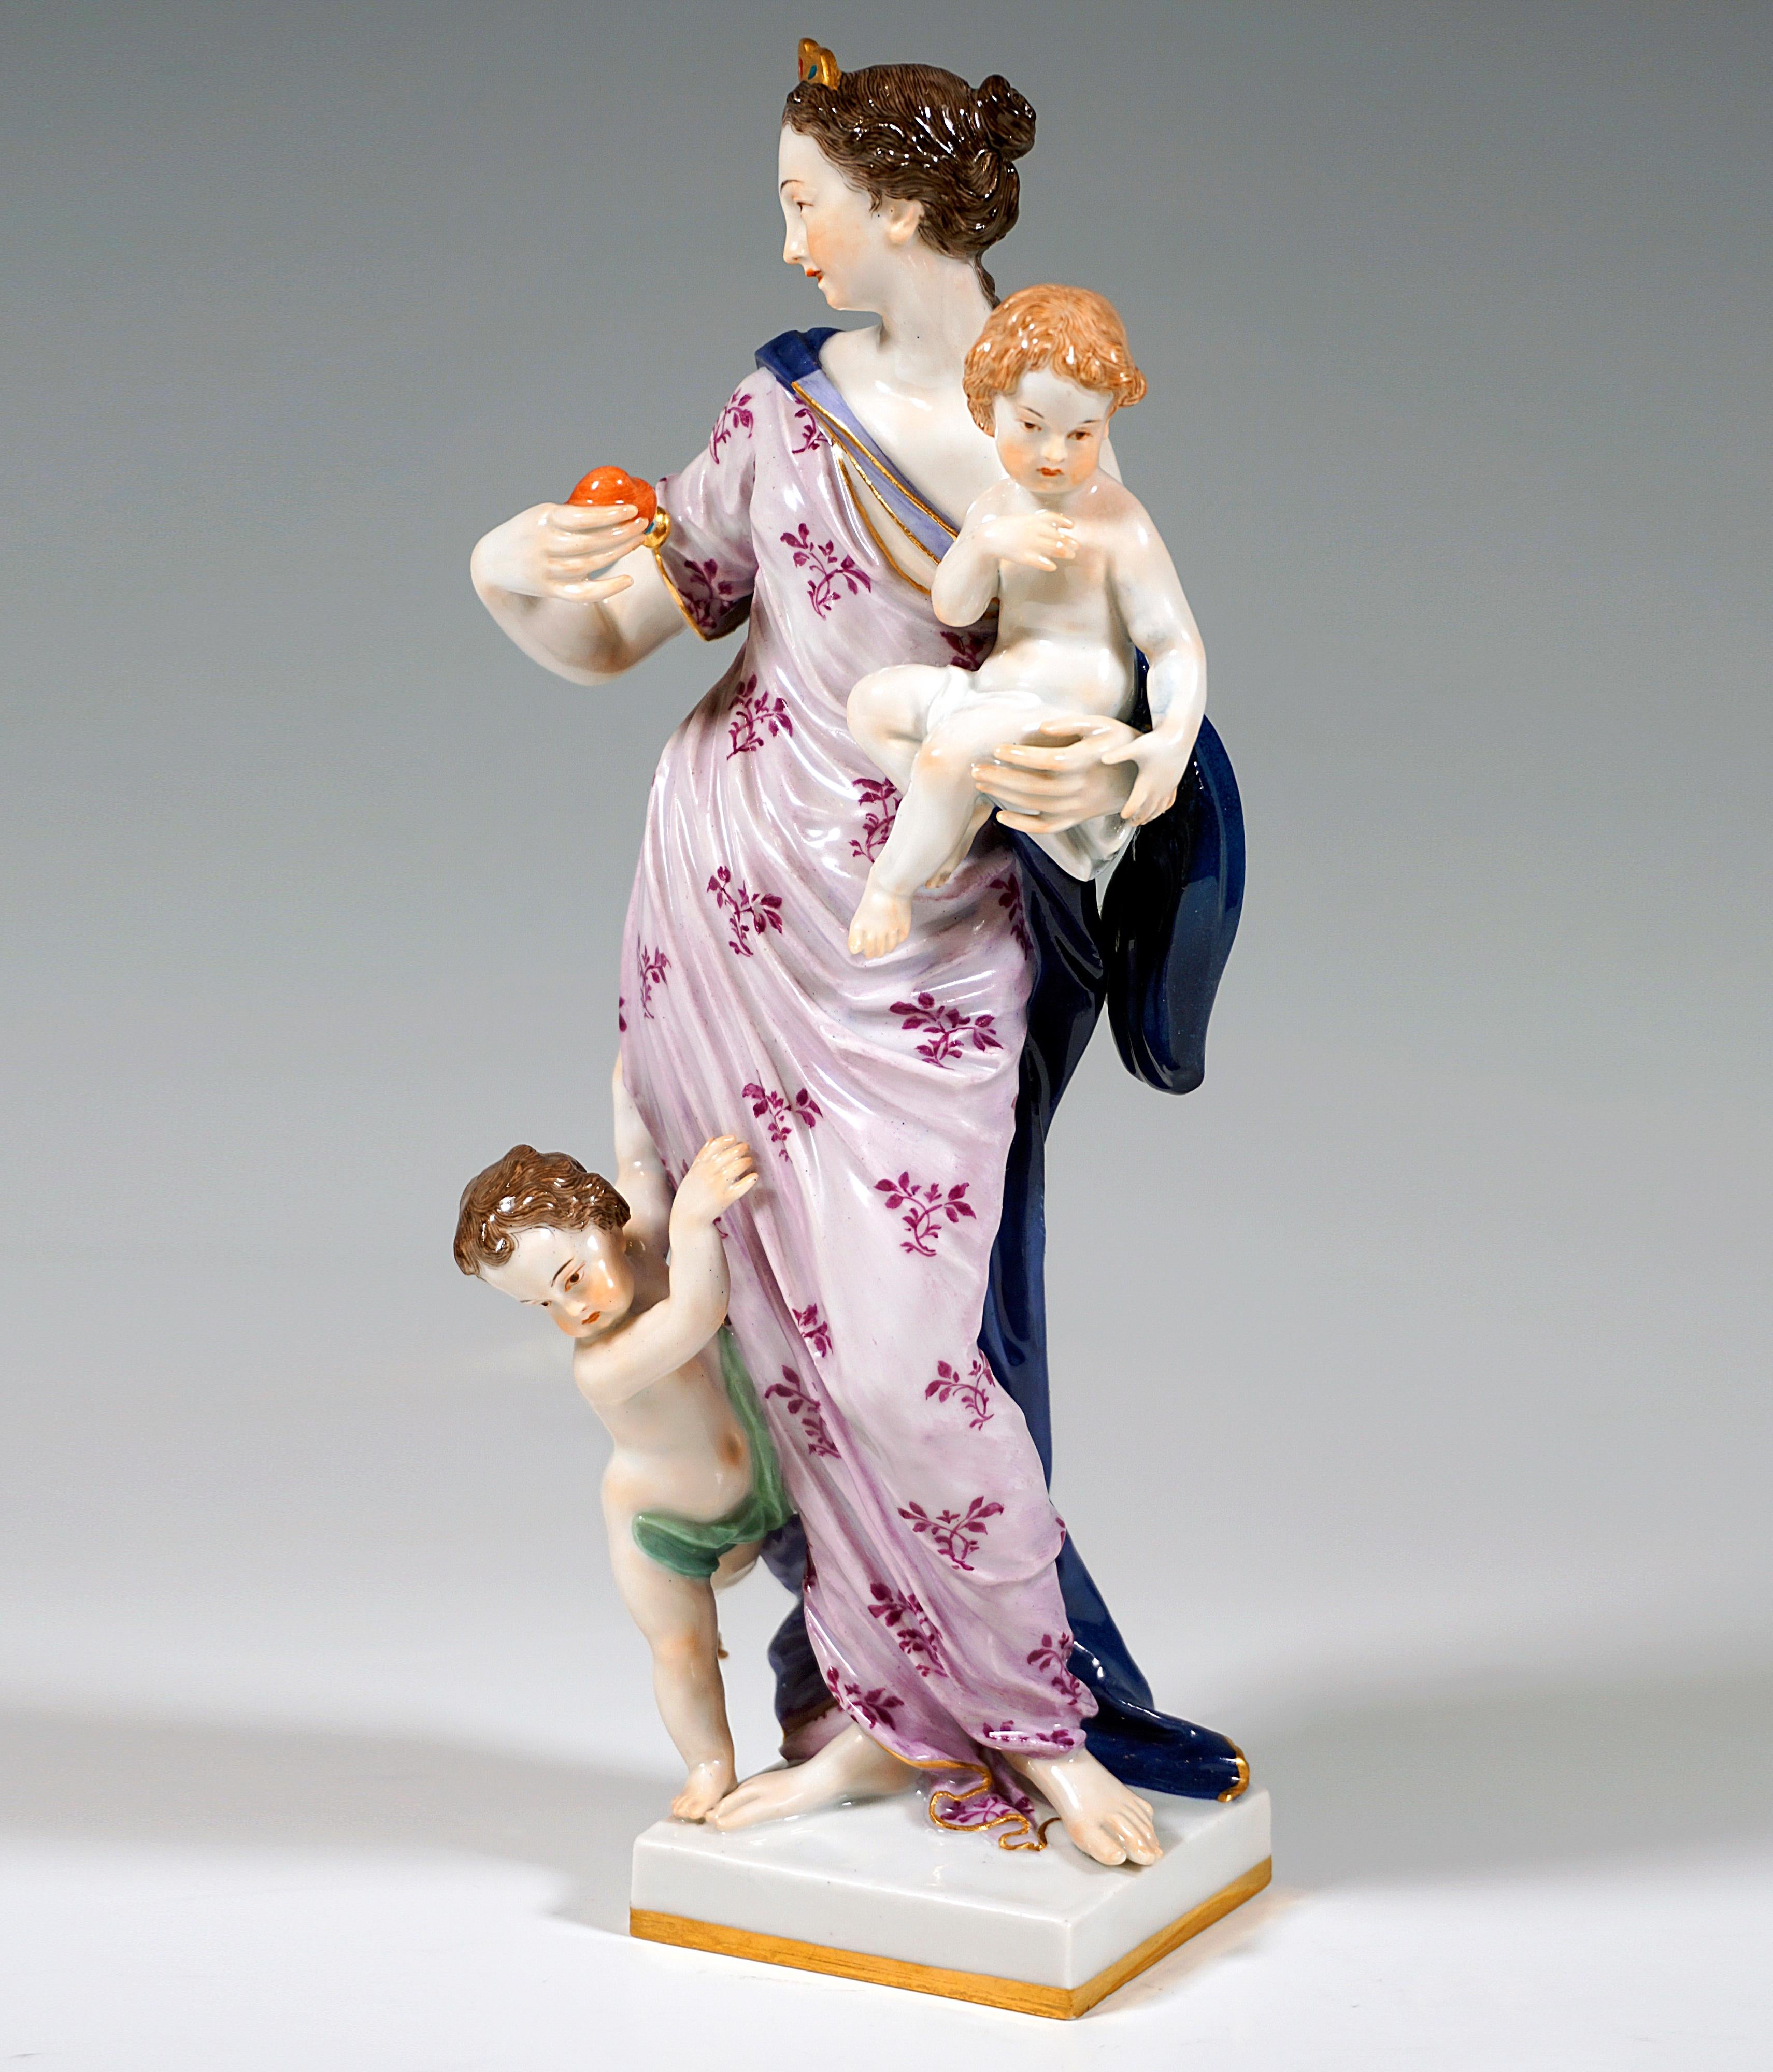 Very rare and exceptional porcelain figure group:
Standing young beauty with her hair tied back at the nape of her neck and crowned with a tiara, wearing a long dress softly embracing her body and a blue cloak reaching down to the ground, carrying